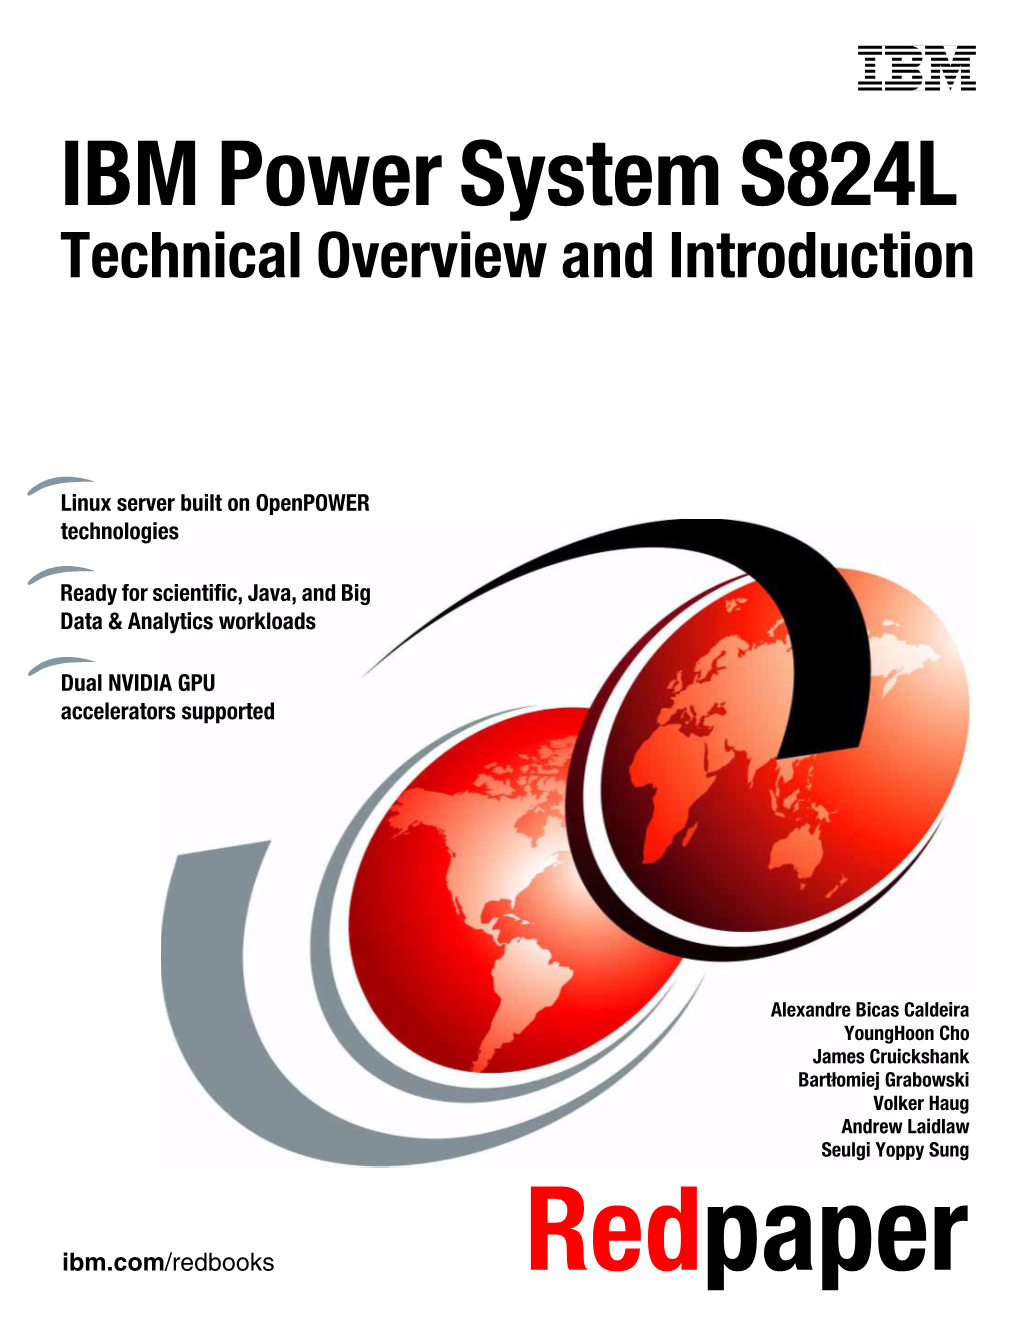 IBM Power System S824L Technical Overview and Introduction